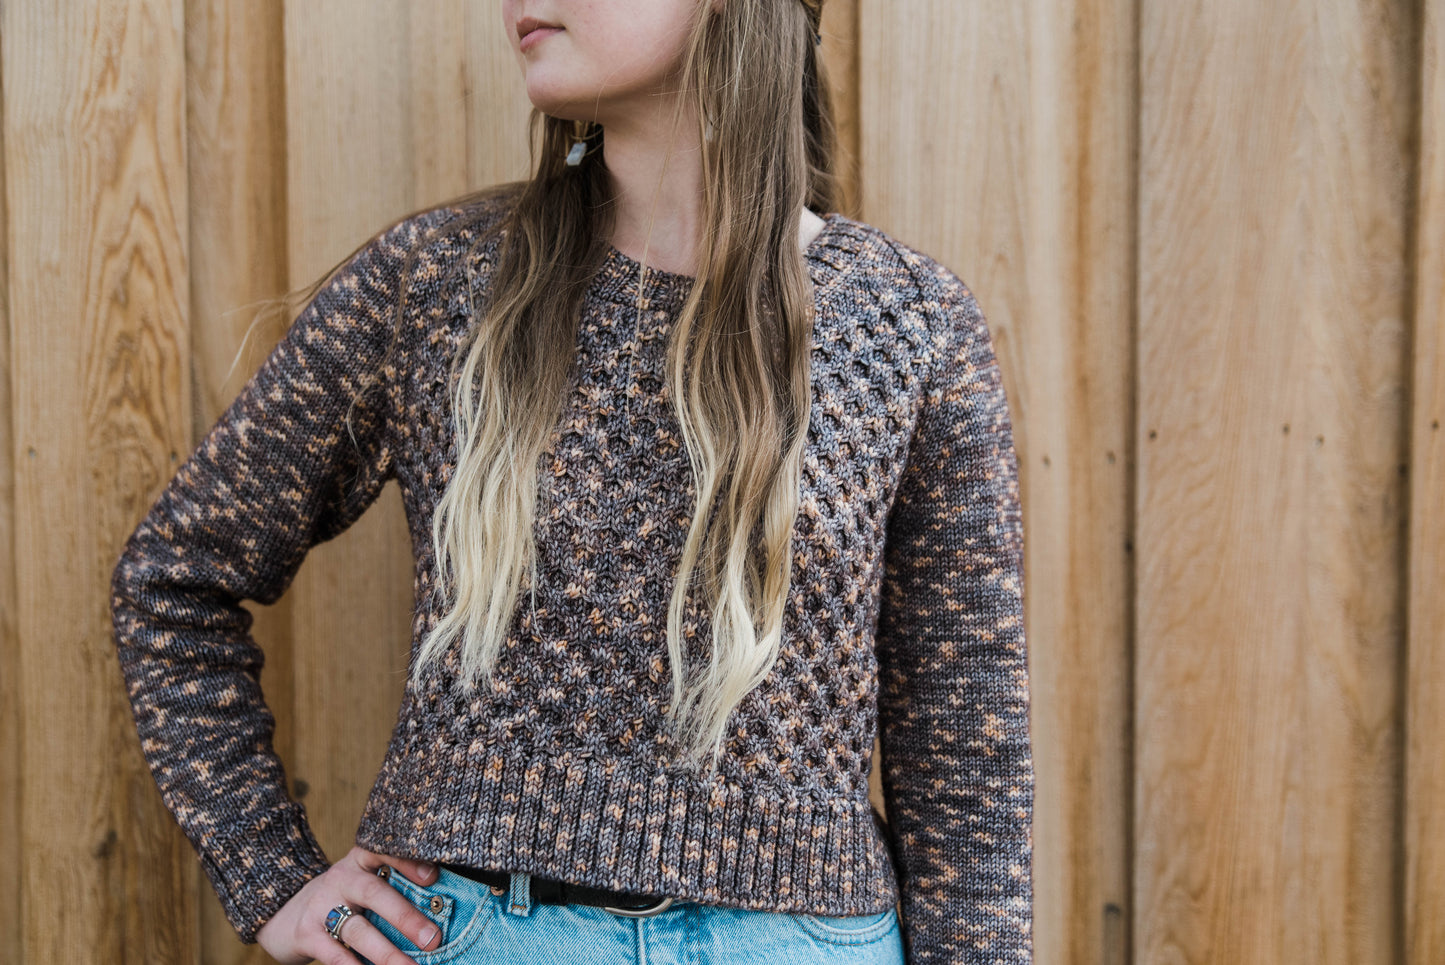 Seen from the neck down, Haley stands in front of a fence, one hand on her hip. She wears a hand knit cropped sweater, made with variegated brown yarn. A honeycomb stitch pattern adorns the body.